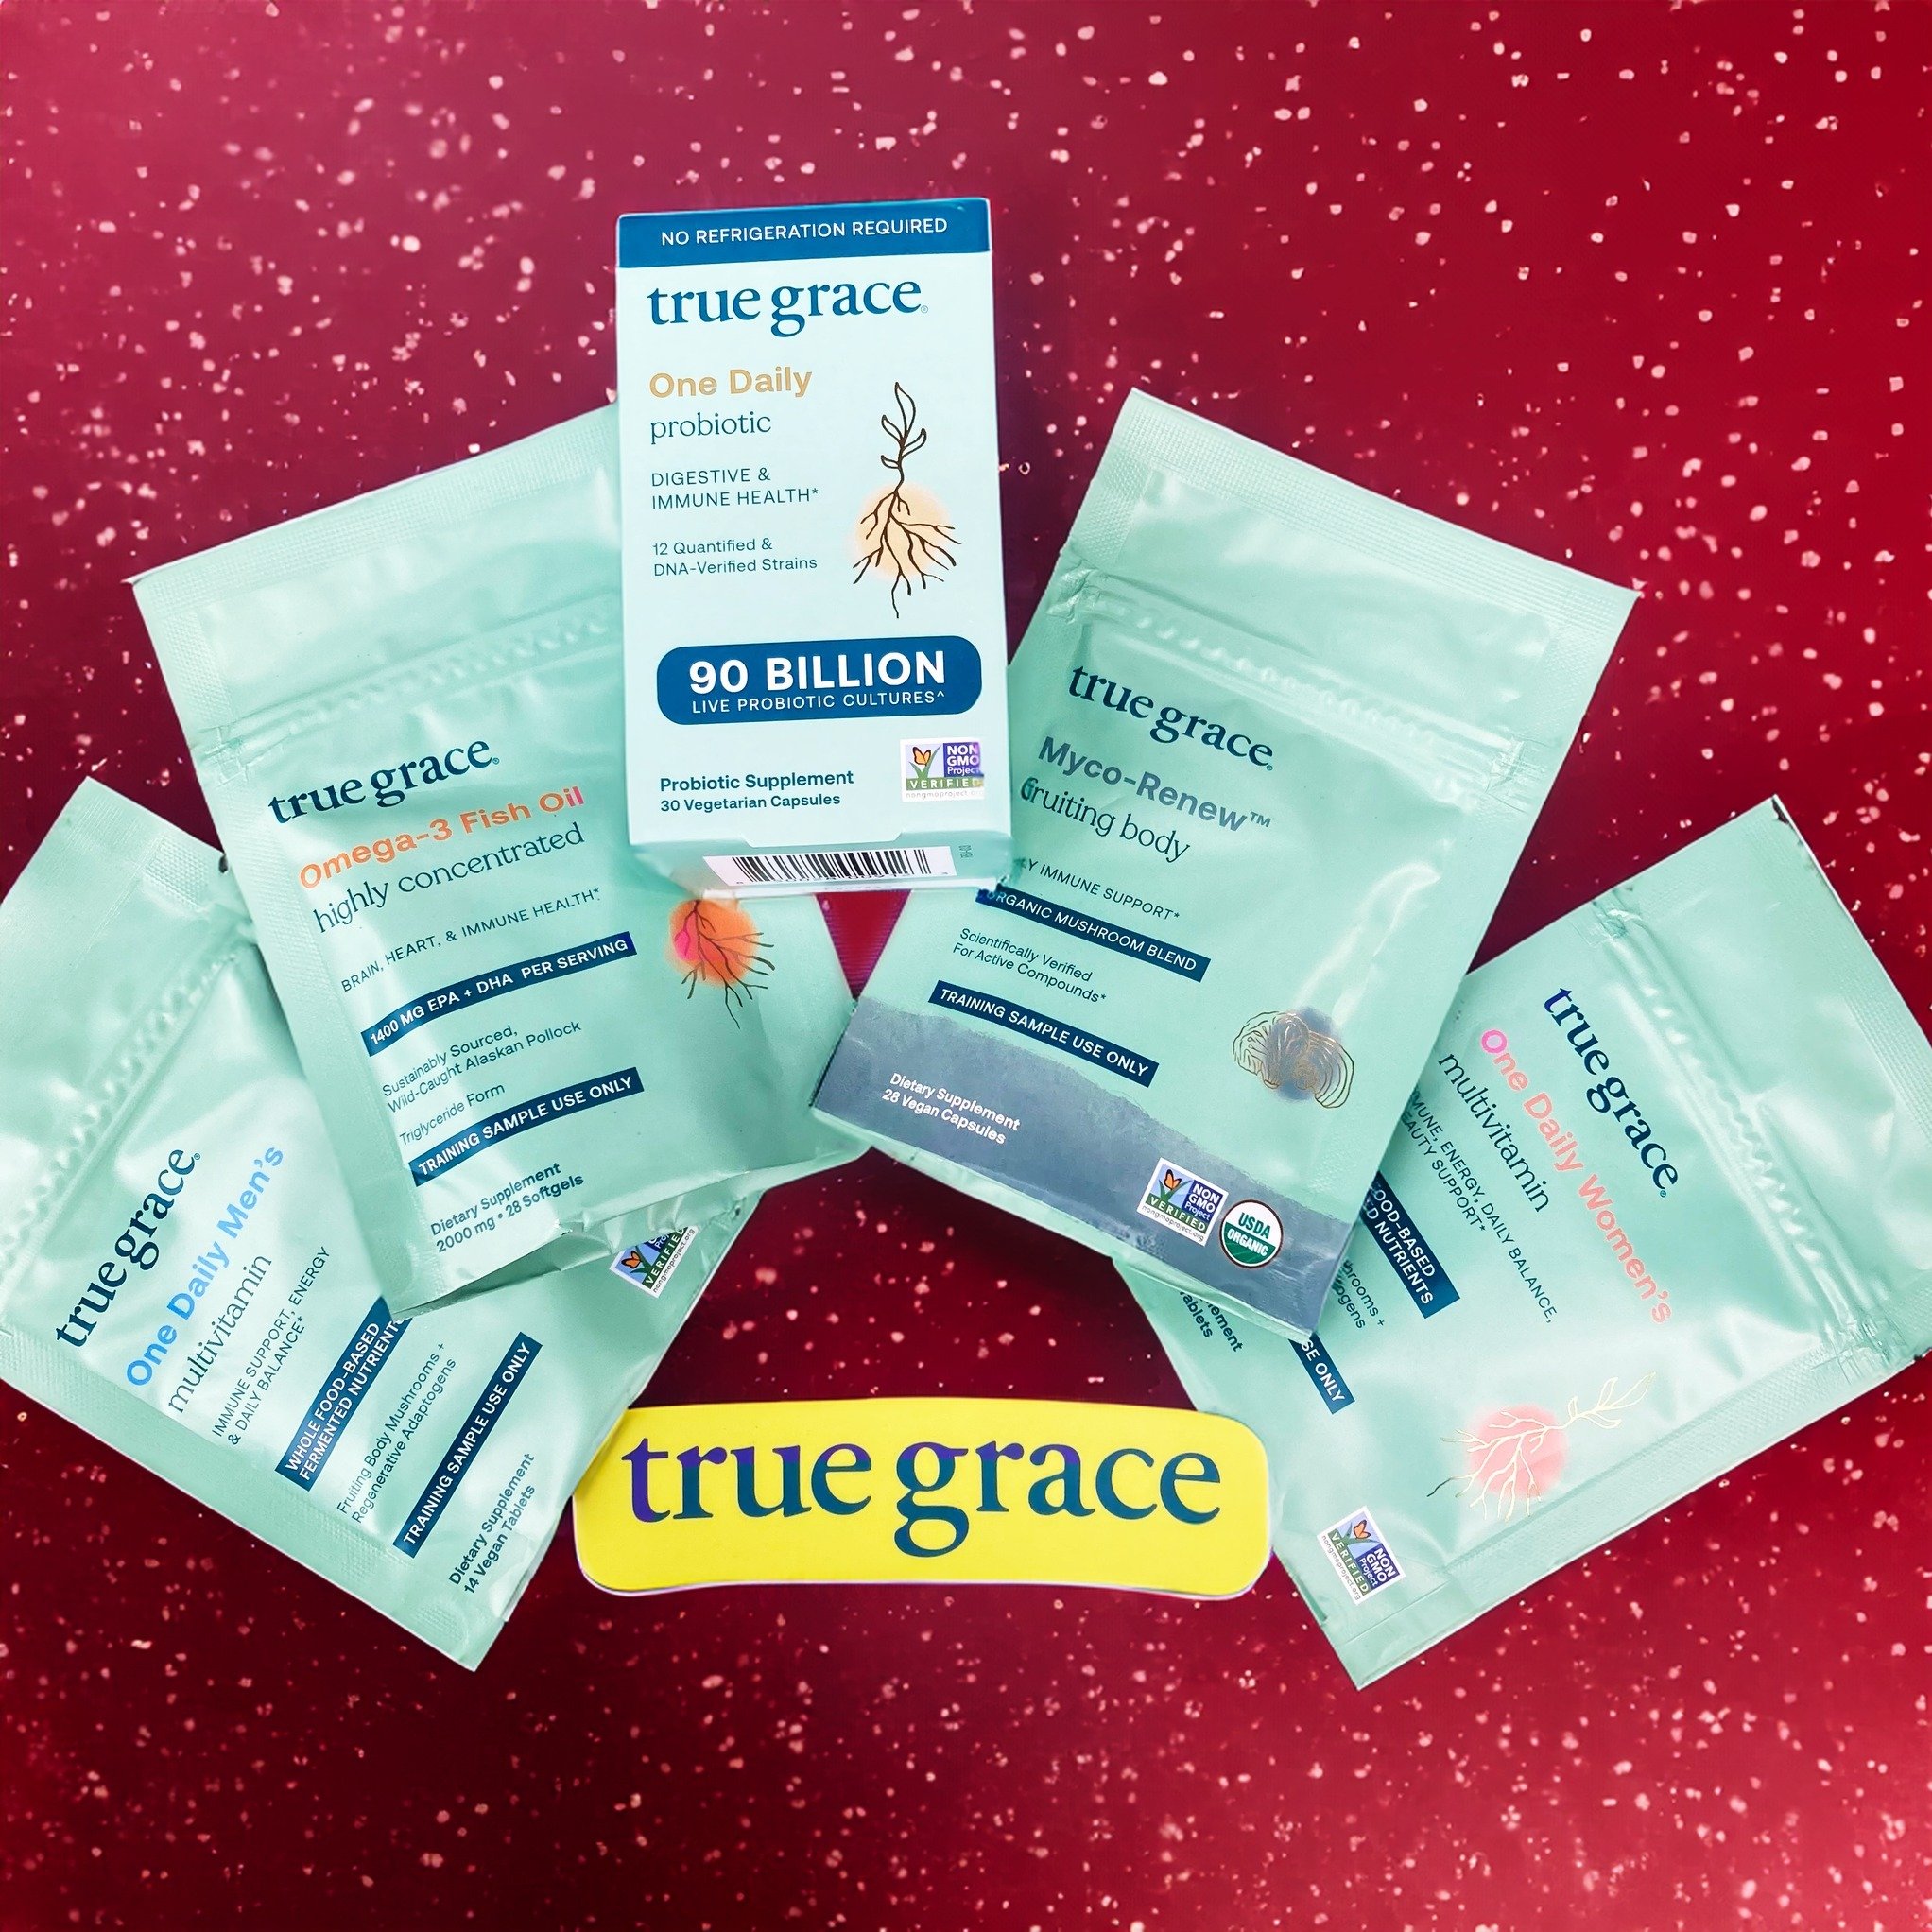 @truegracehealth Giveaway!

Just like this post and make sure to be following both the Rainbow Blossom and the True Grace accounts and a True Grace gift set (including a probiotics, fish oil, multivitamins, and more) could be all yours!

&quot;With n